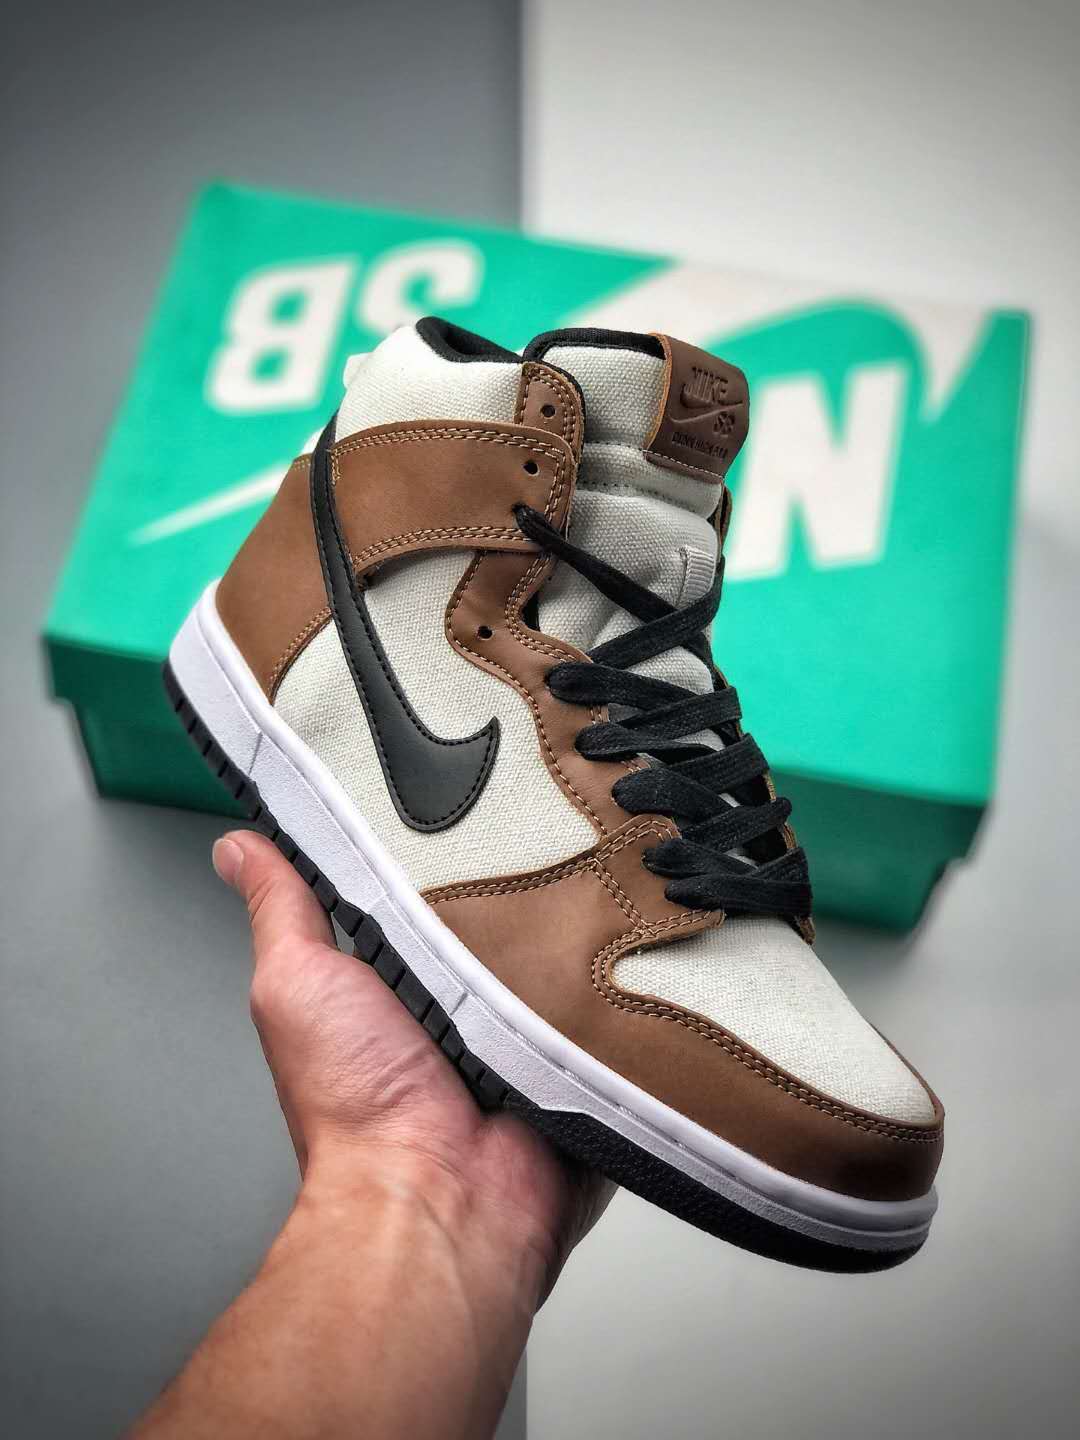 Nike SB Dunk High Baroque Brown BQ6826-201 - Iconic Sneakers for Style and Performance